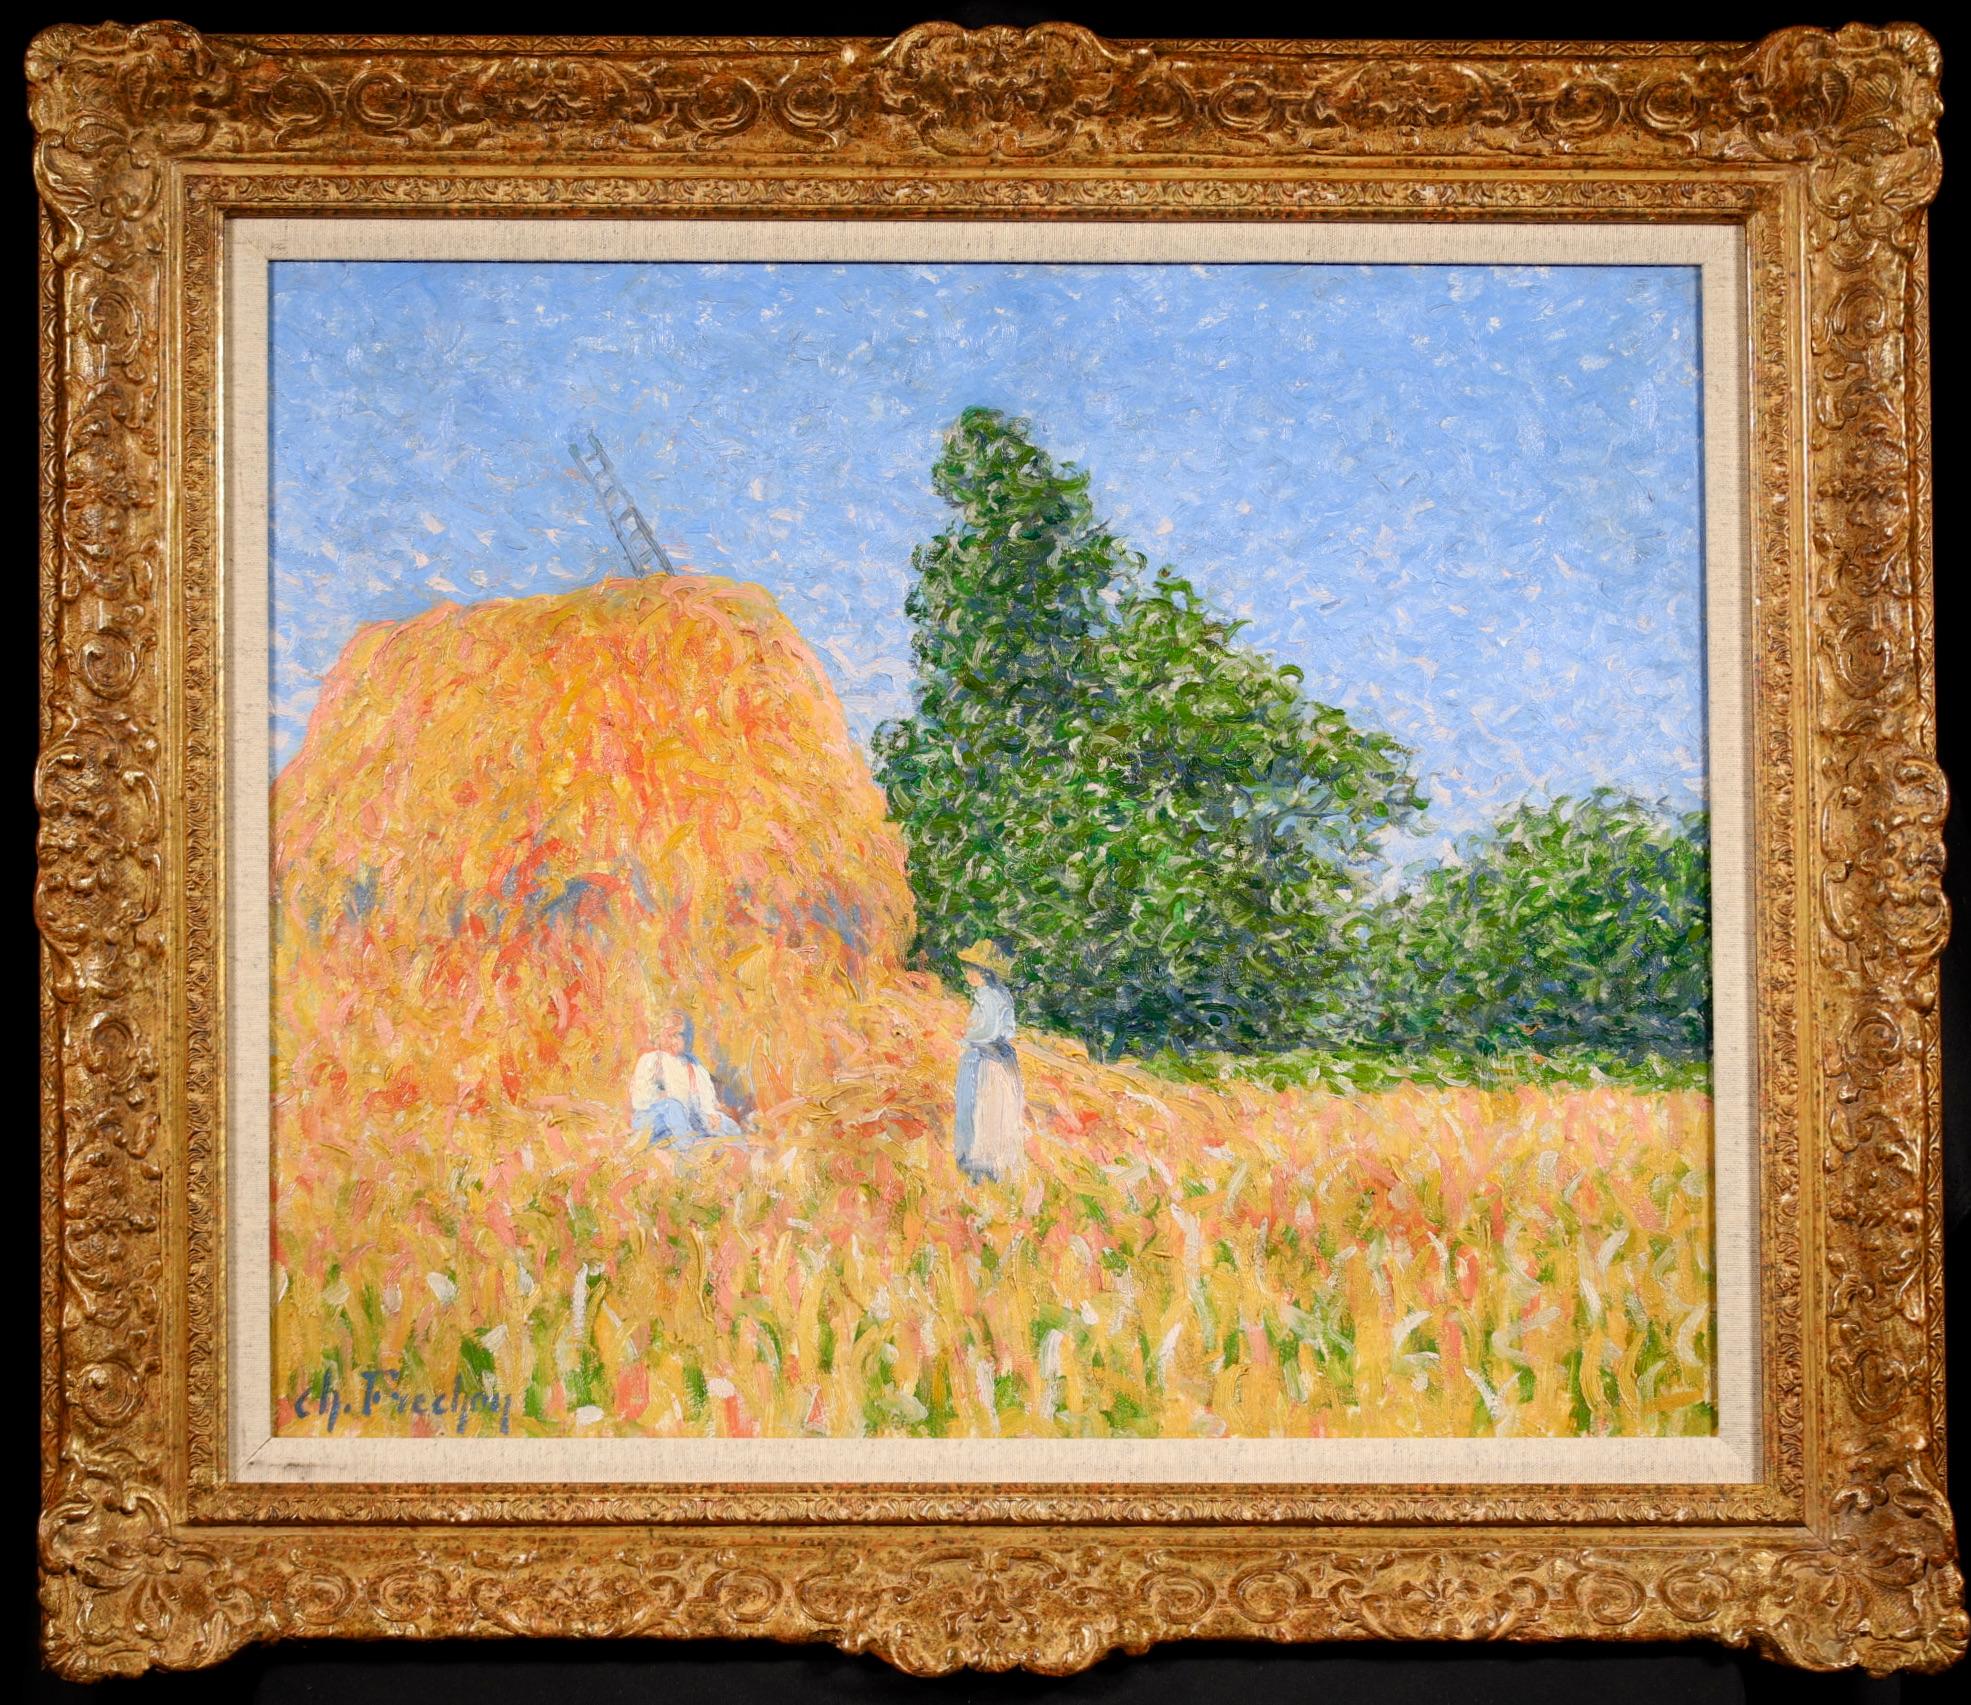 The Harvesters - Post Impressionist Figures in Landscape Oil by Charles Frechon